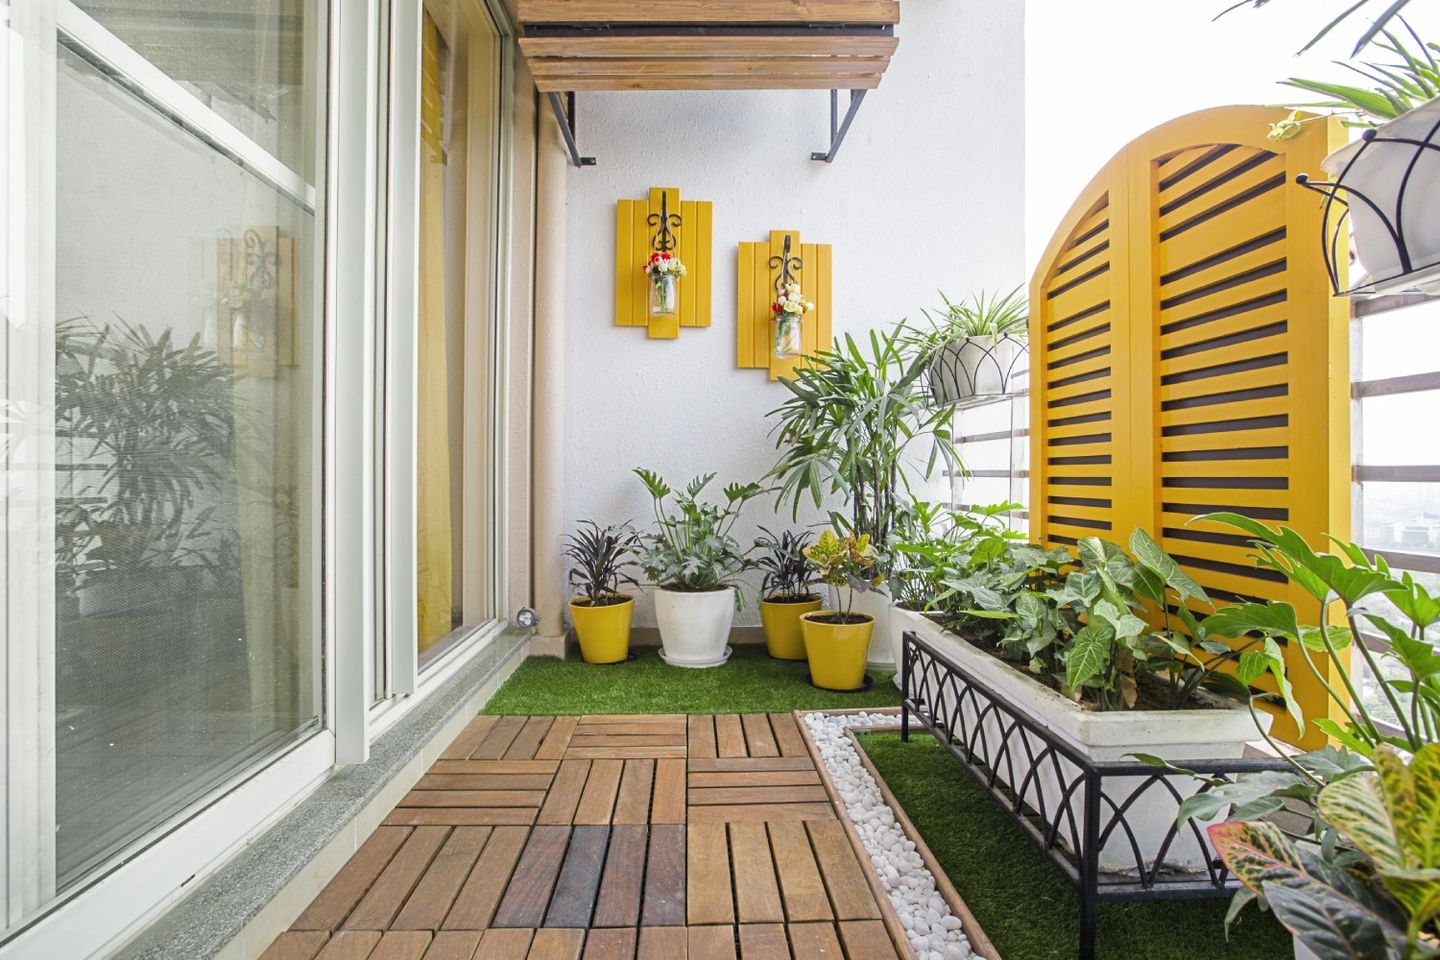 10X7 Ft Balcony Design With Wooden And Yellow Accents - Livspace